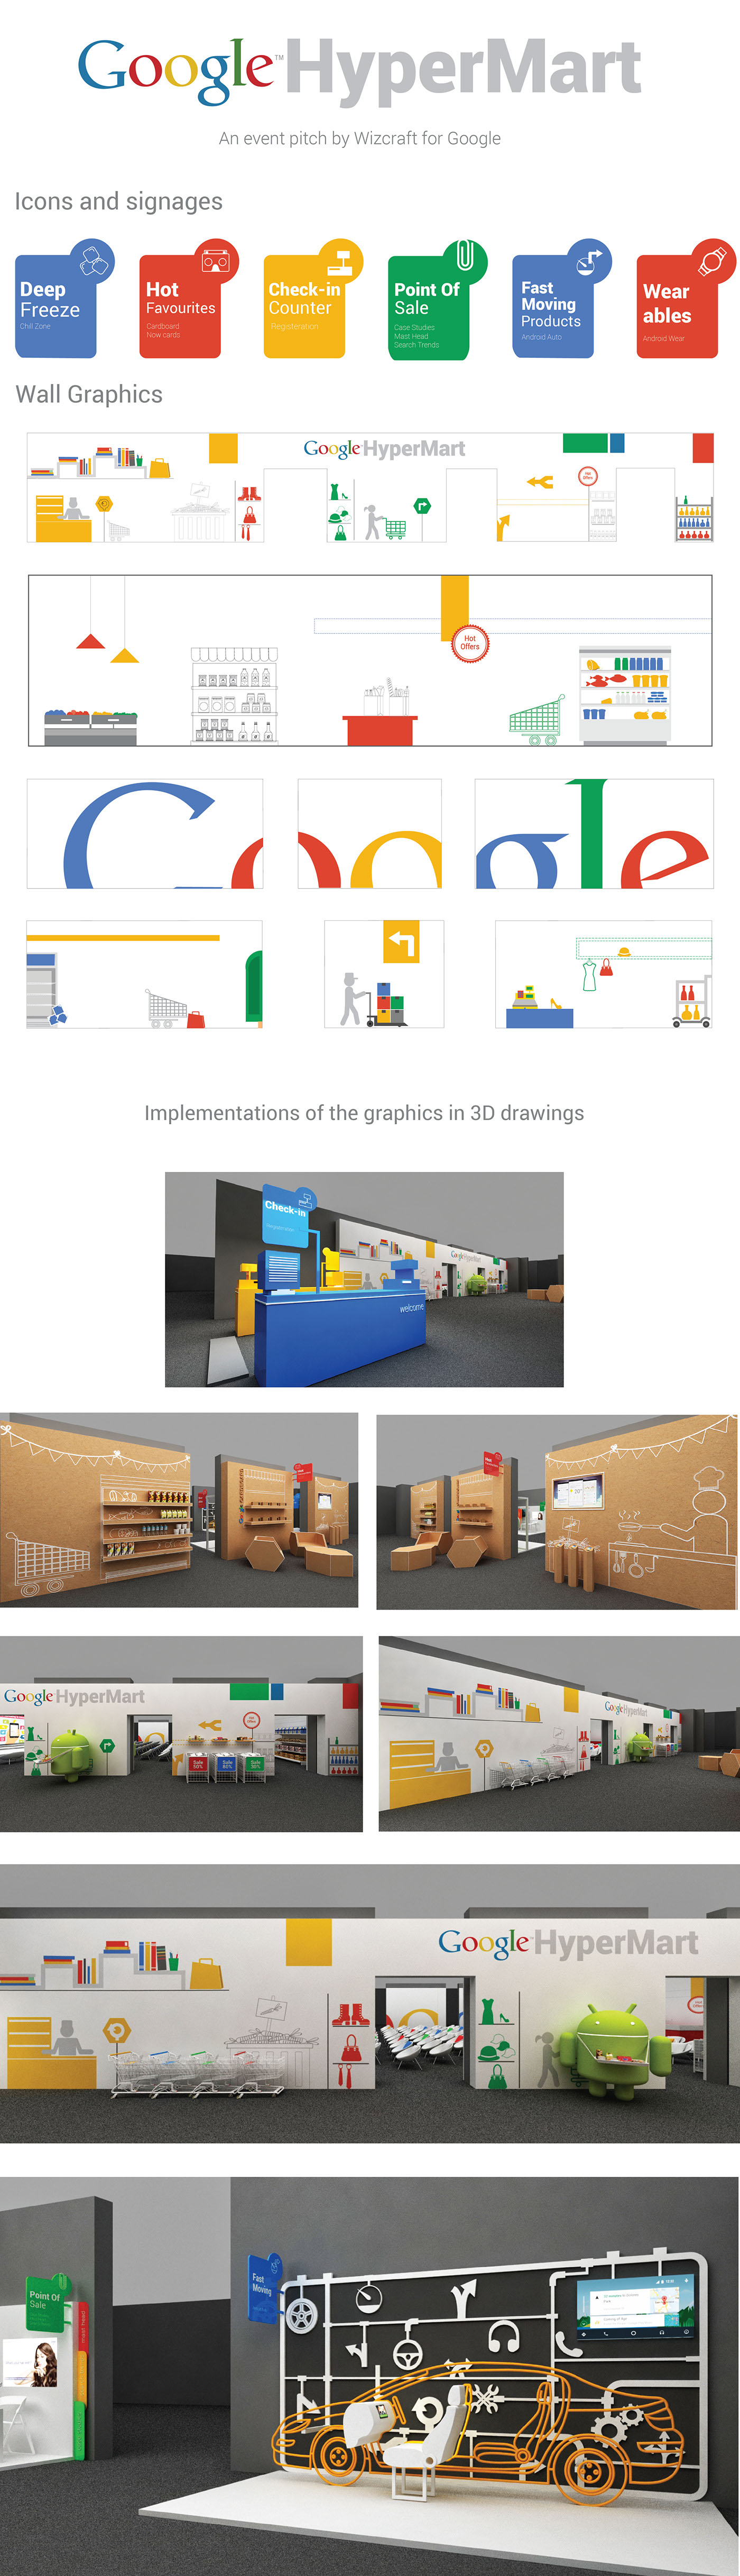 Wizcraft Event Design google infographics icons Wall Graphics Signage Hypermart visual design graphics